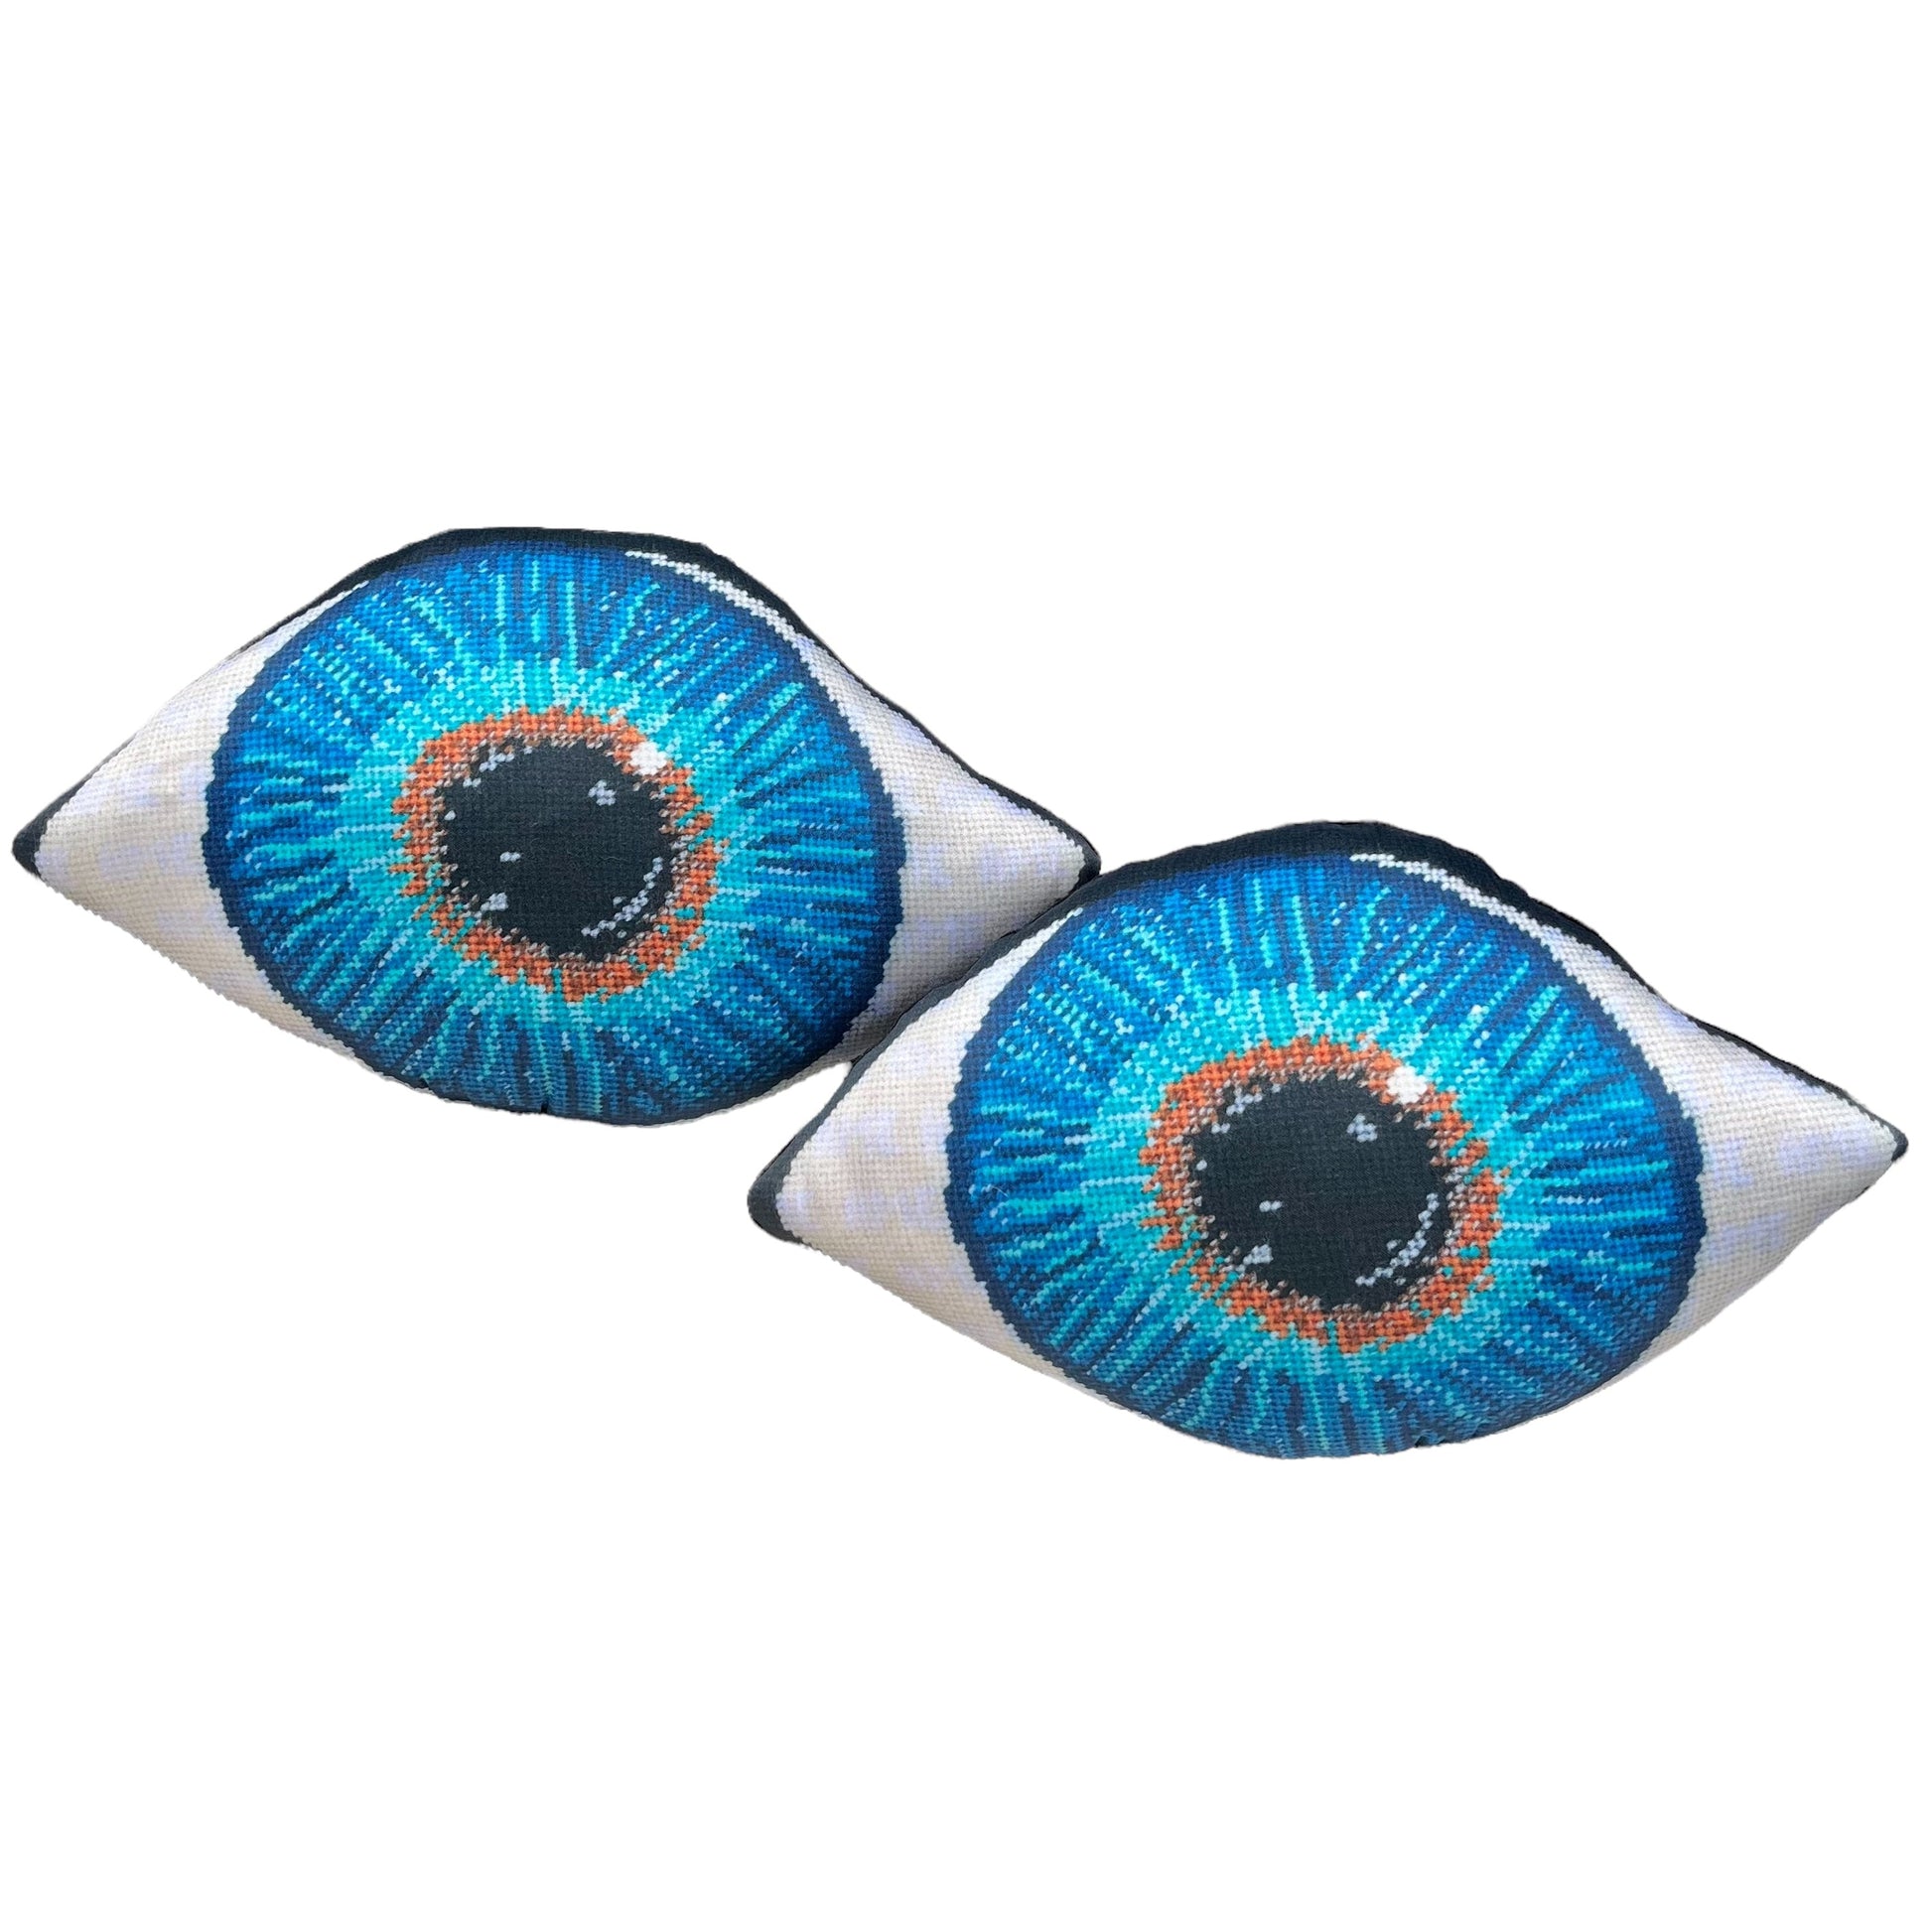 blue eye sculpted pillow has gold in center, turning to turquoise, then deep blues - very detailed